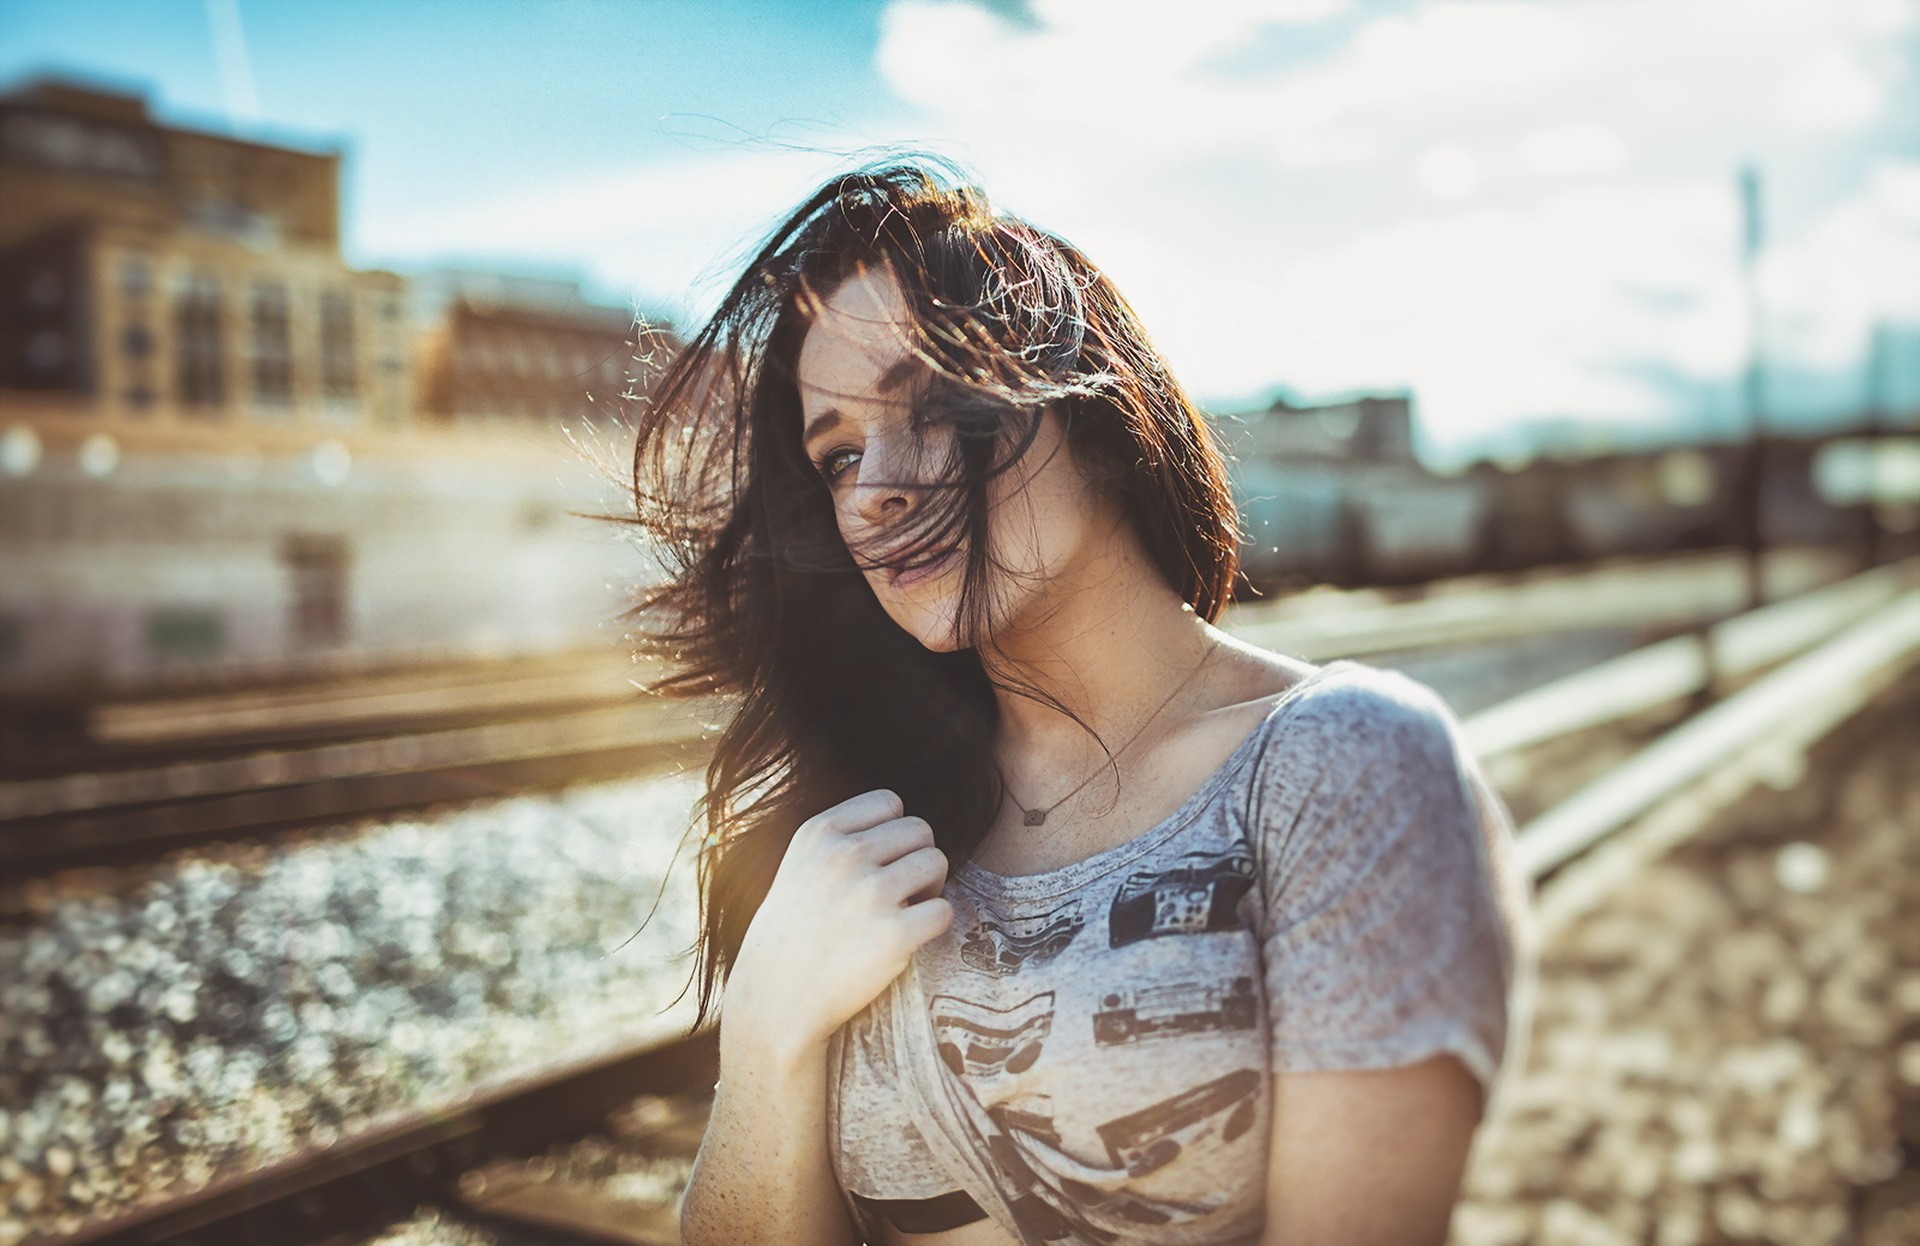 People 1920x1246 urban women portrait model T-shirt hair in face looking into the distance railway